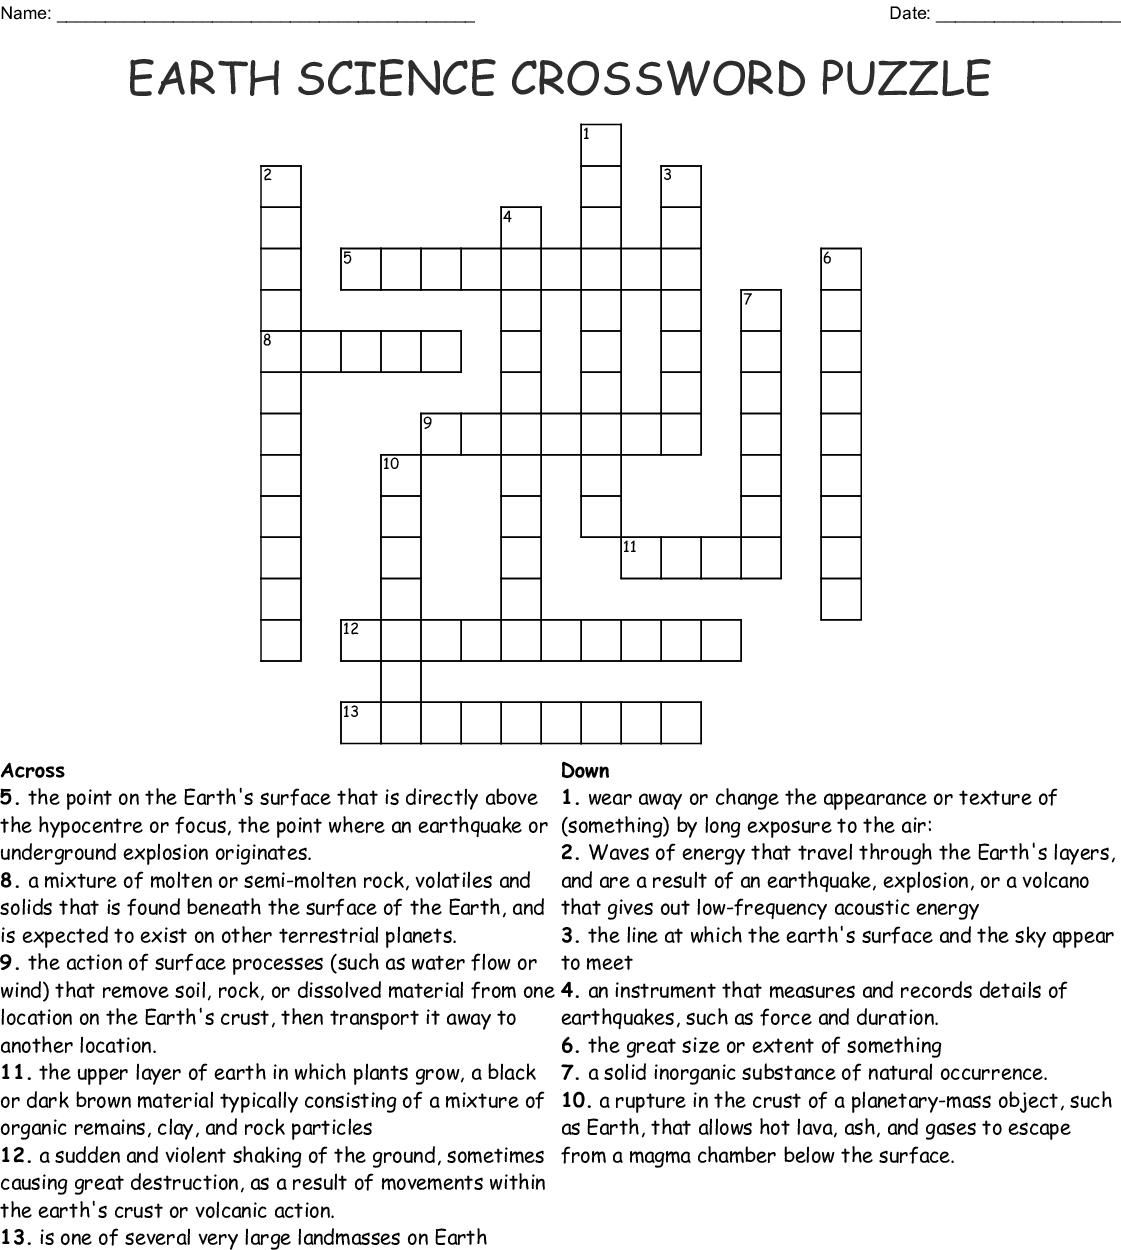 Science Crossword Puzzles Printable With Answers | Printable Crossword